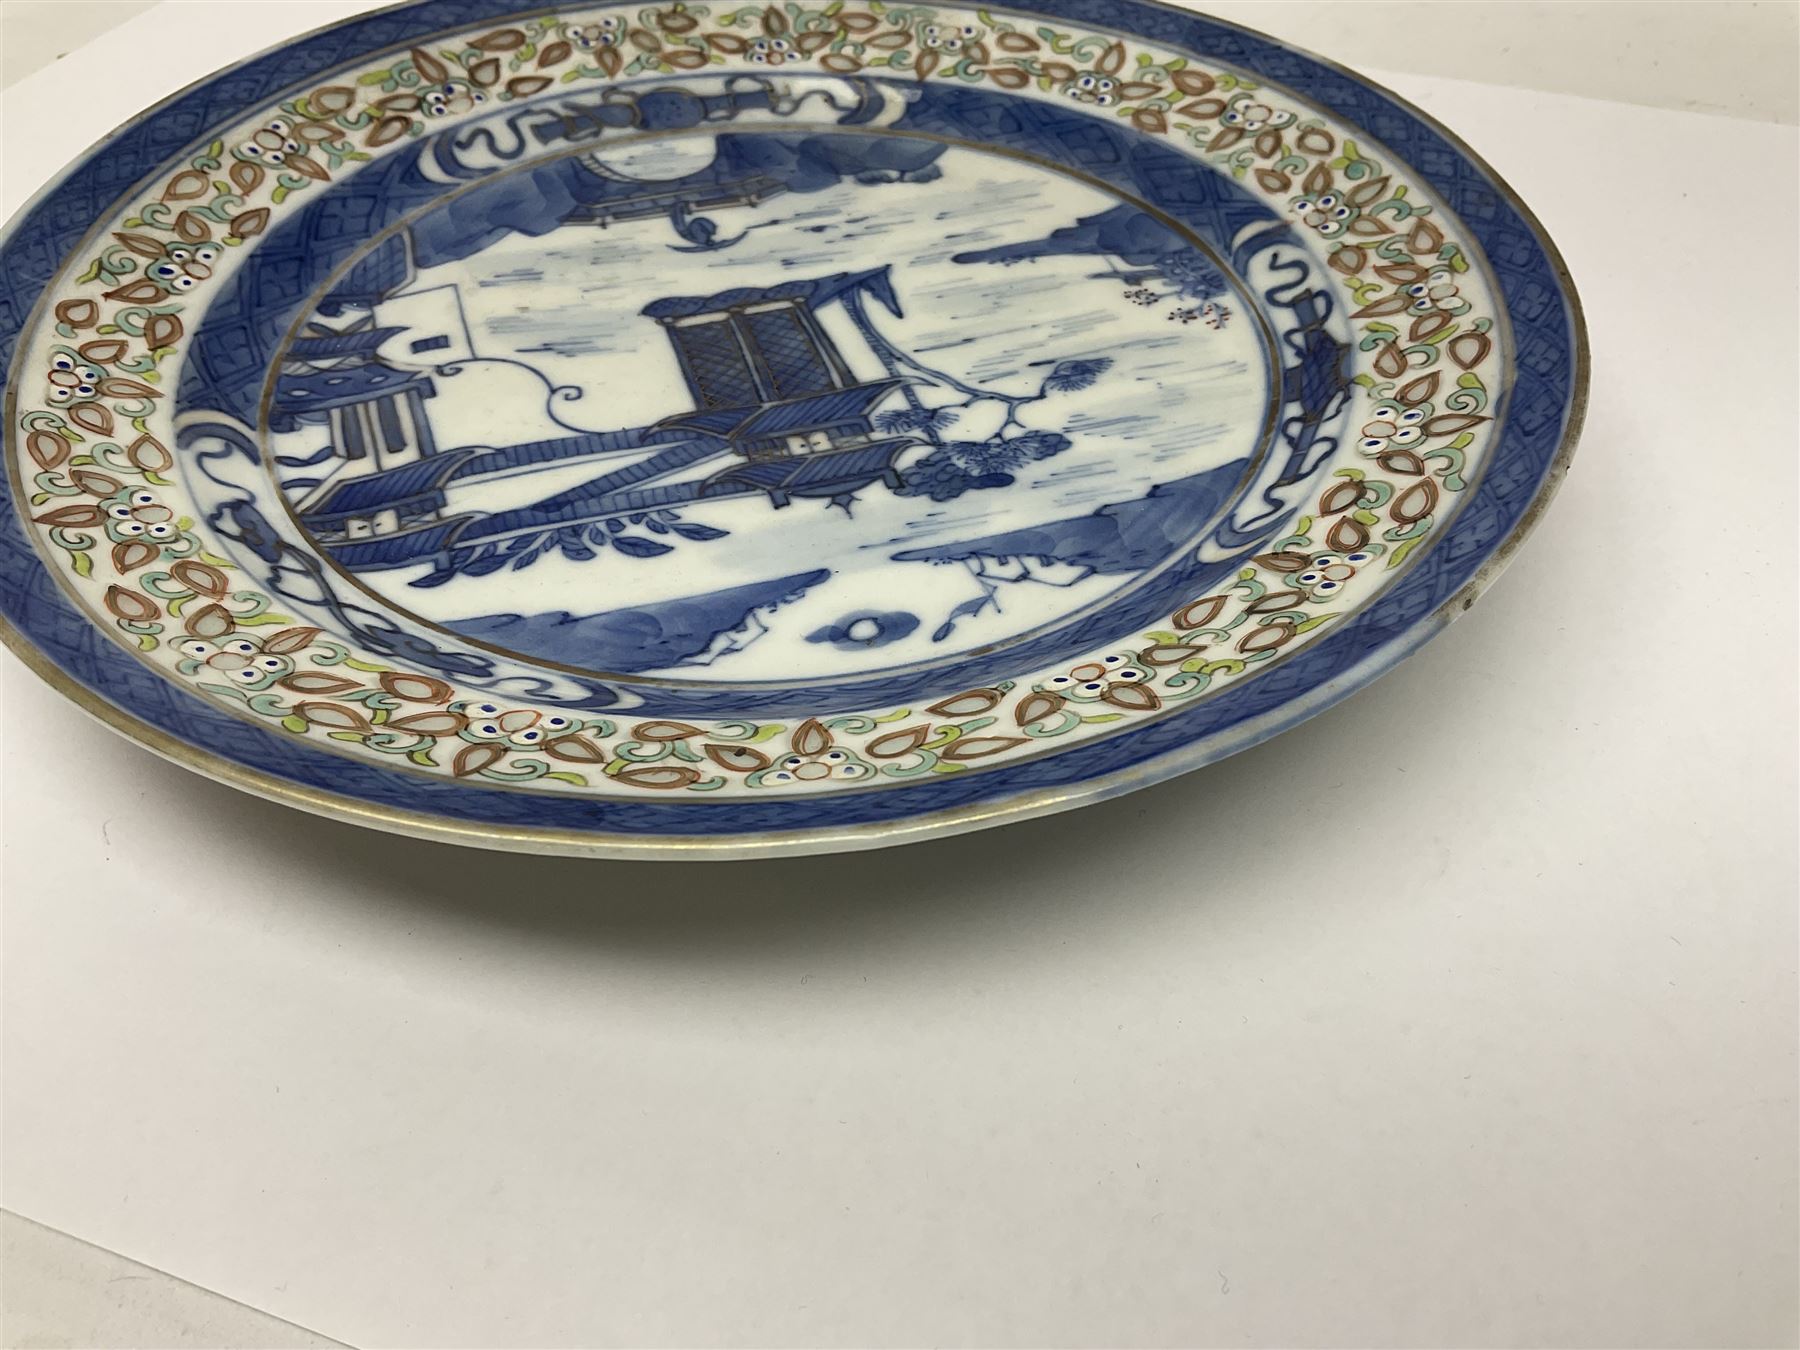 Late 19th century Chinese rice plate - Image 4 of 8